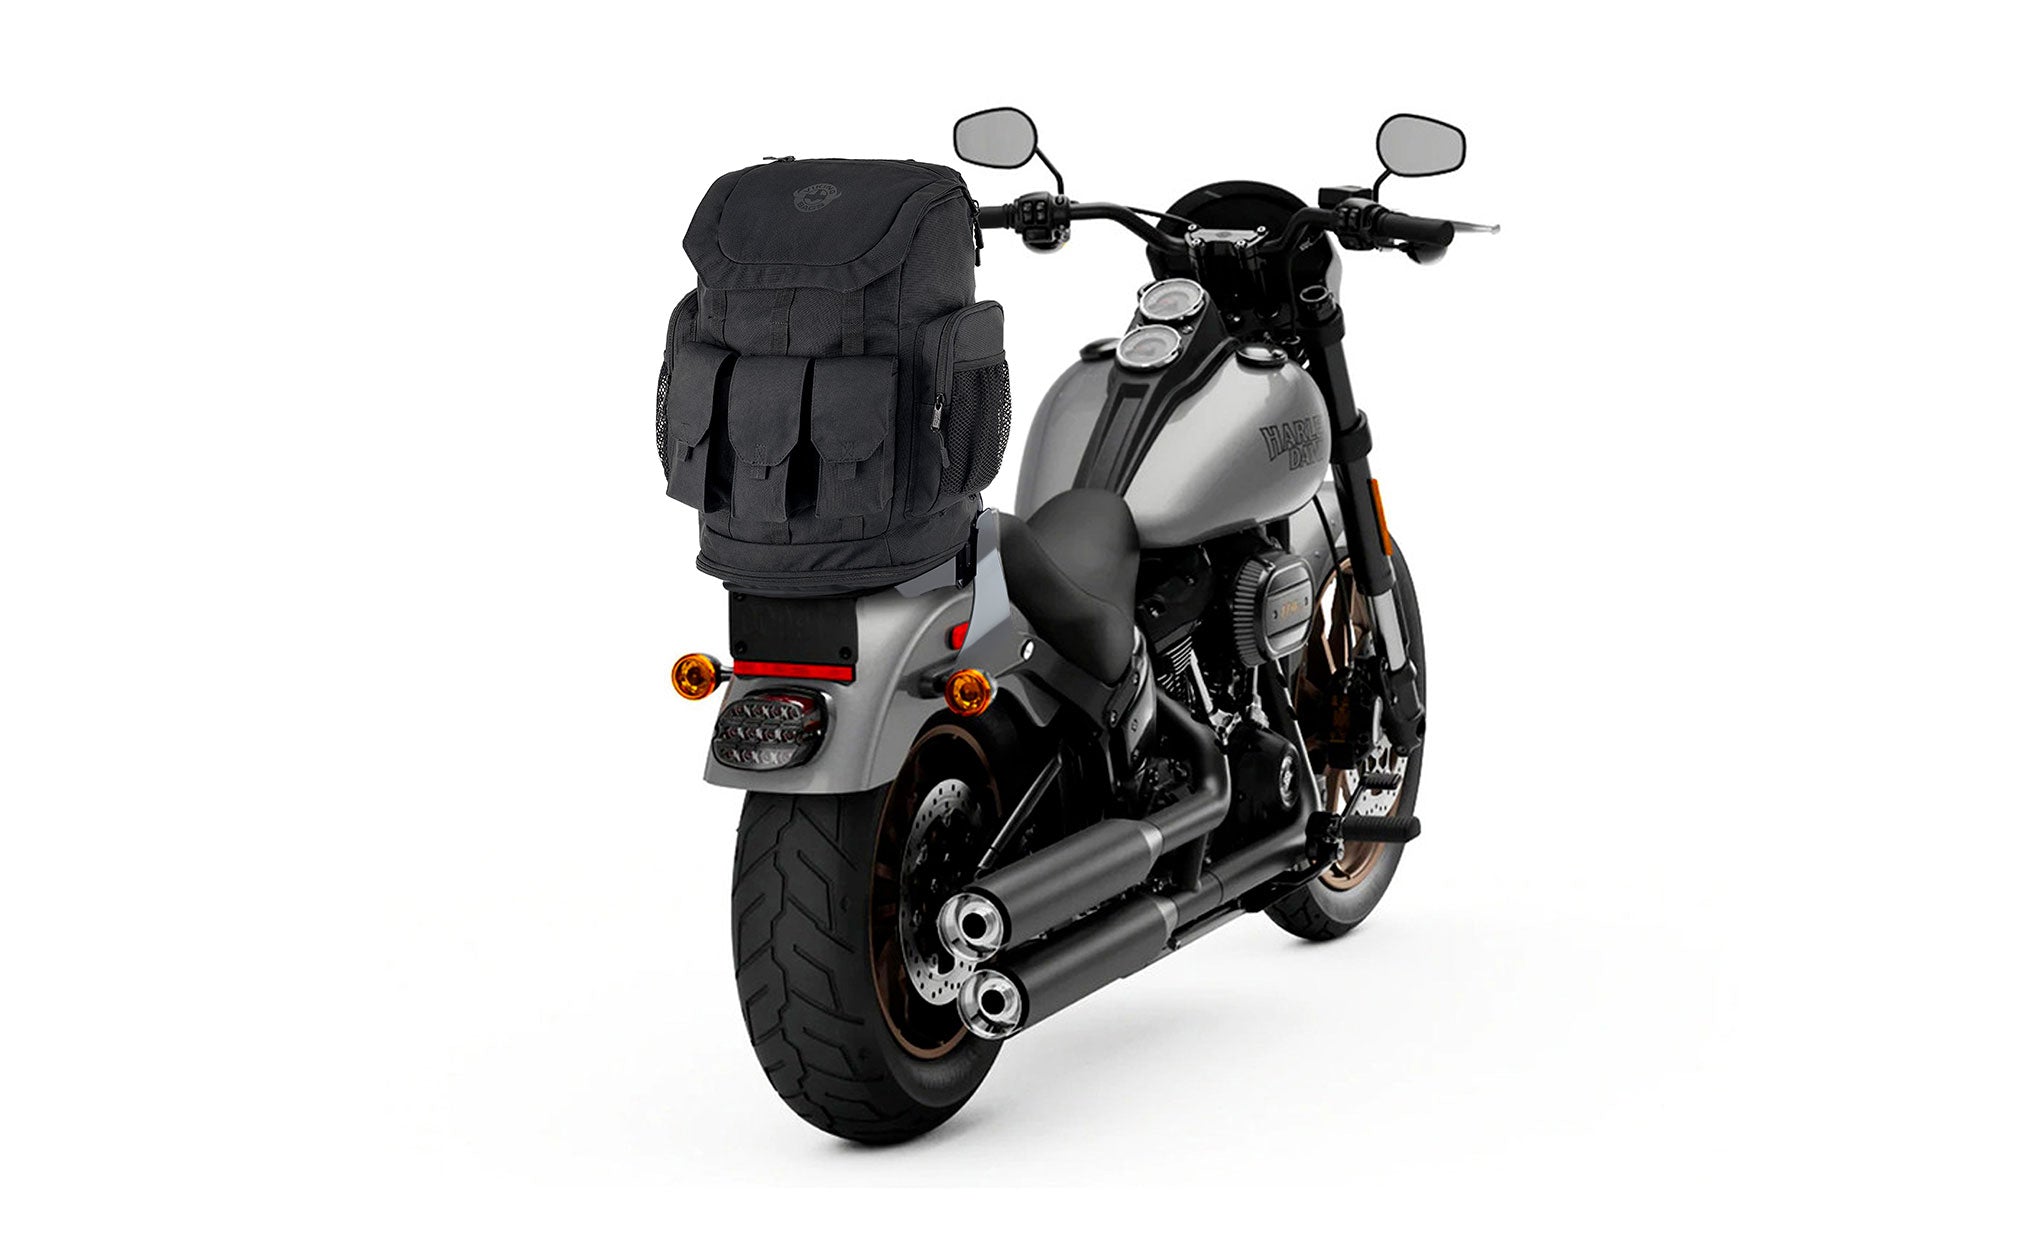 Viking Trident XL Motorcycle Sissy Bar Backpack for Harley Davidson Bag on Bike View @expand